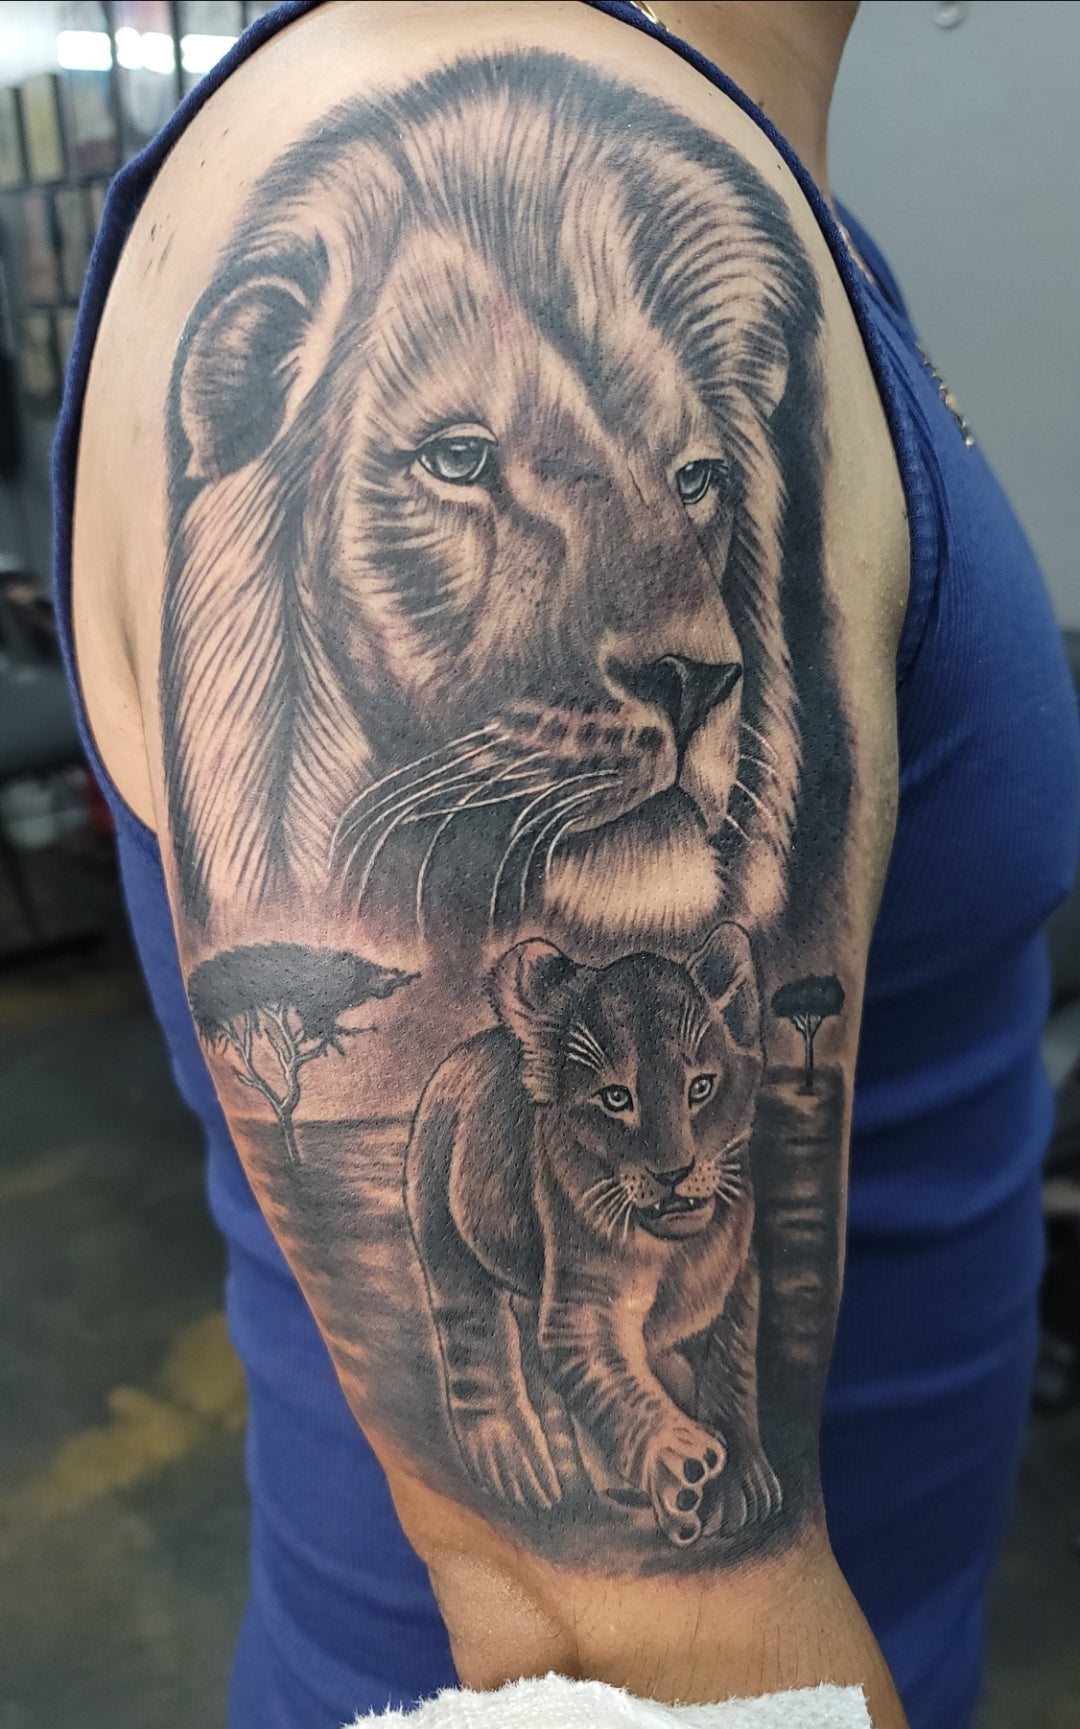 Full Day Tattoo Session Upper Arm